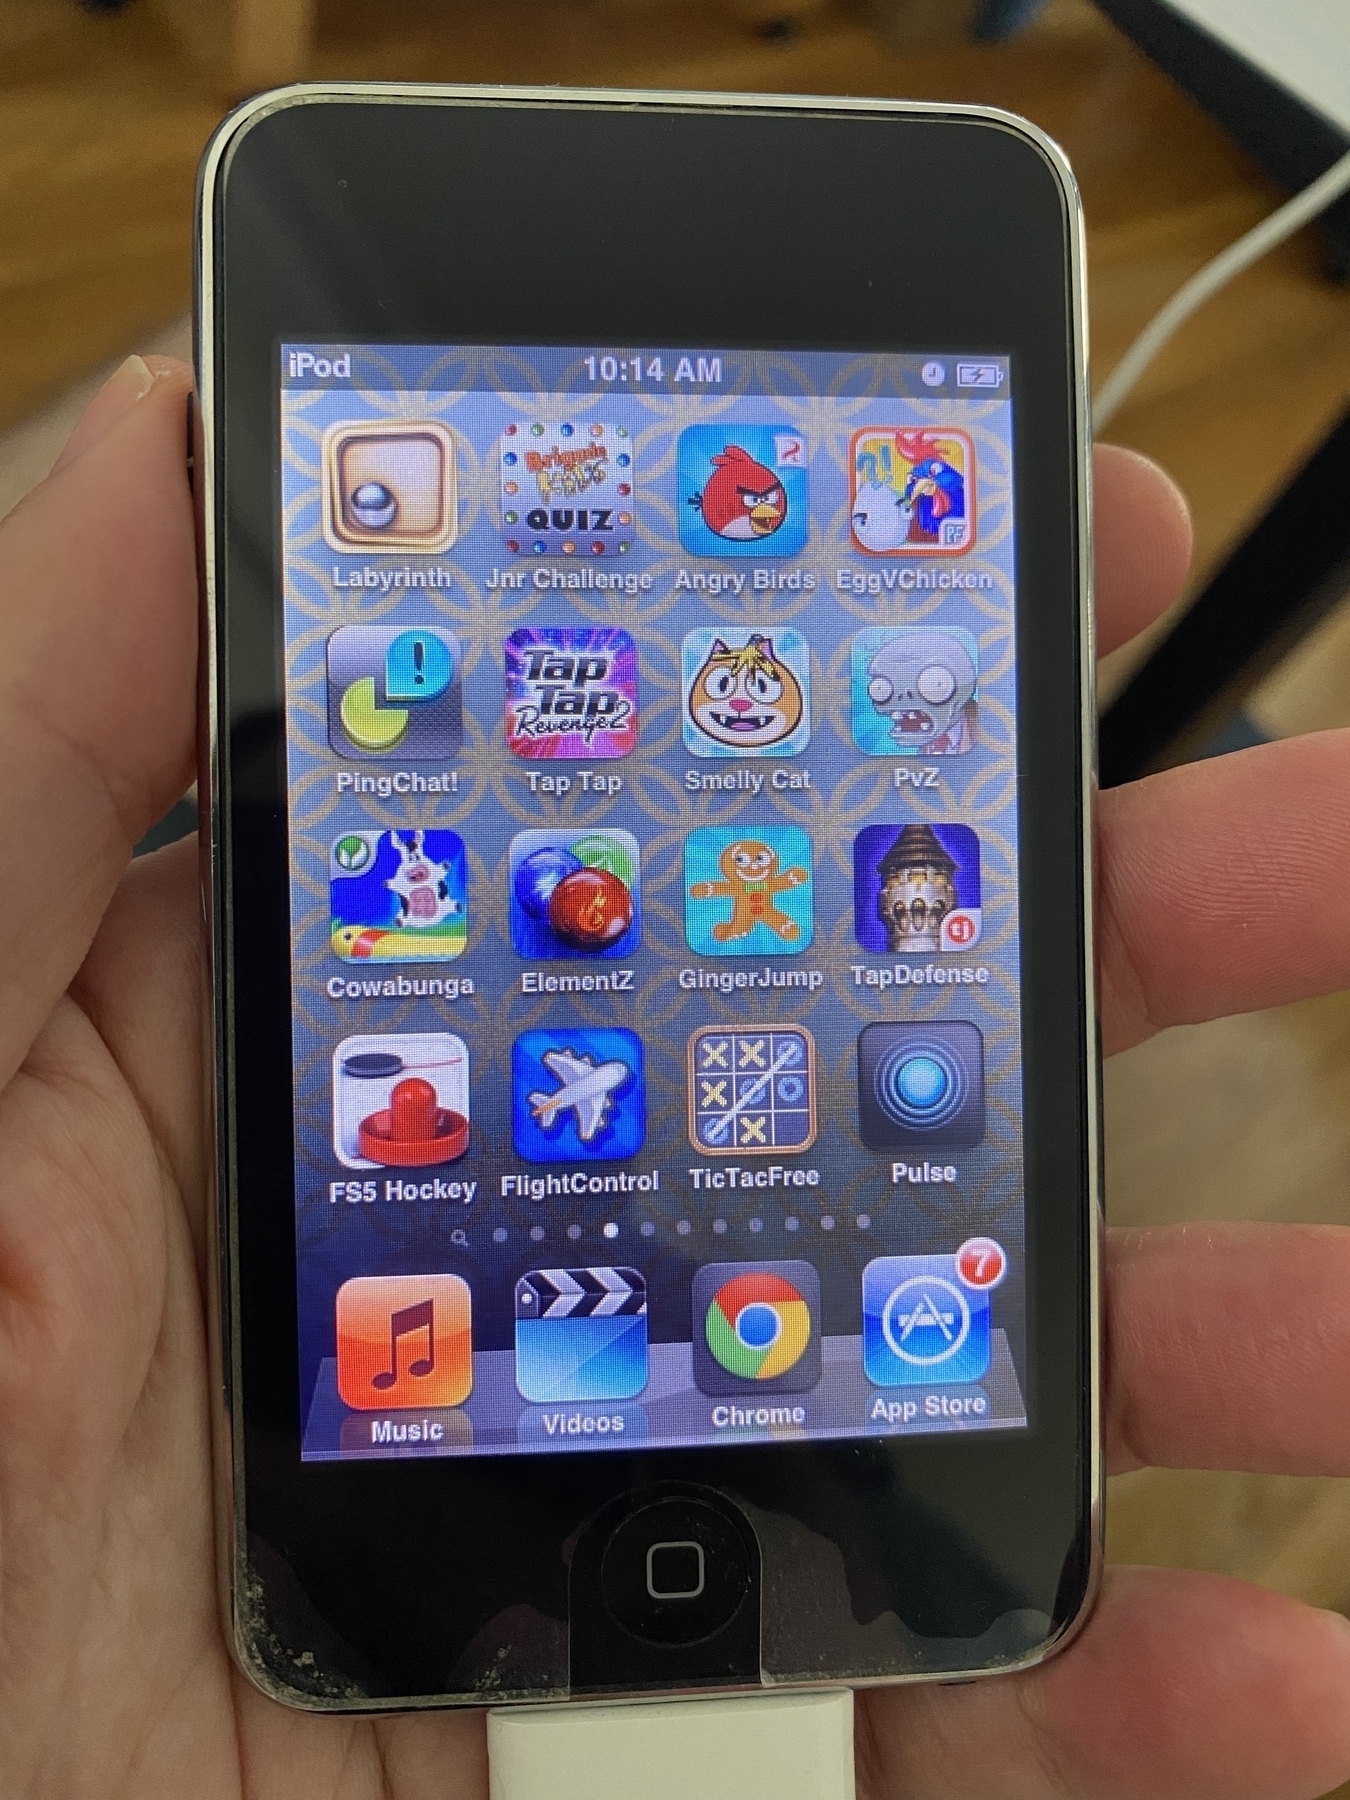 an photo of a old ipod touch